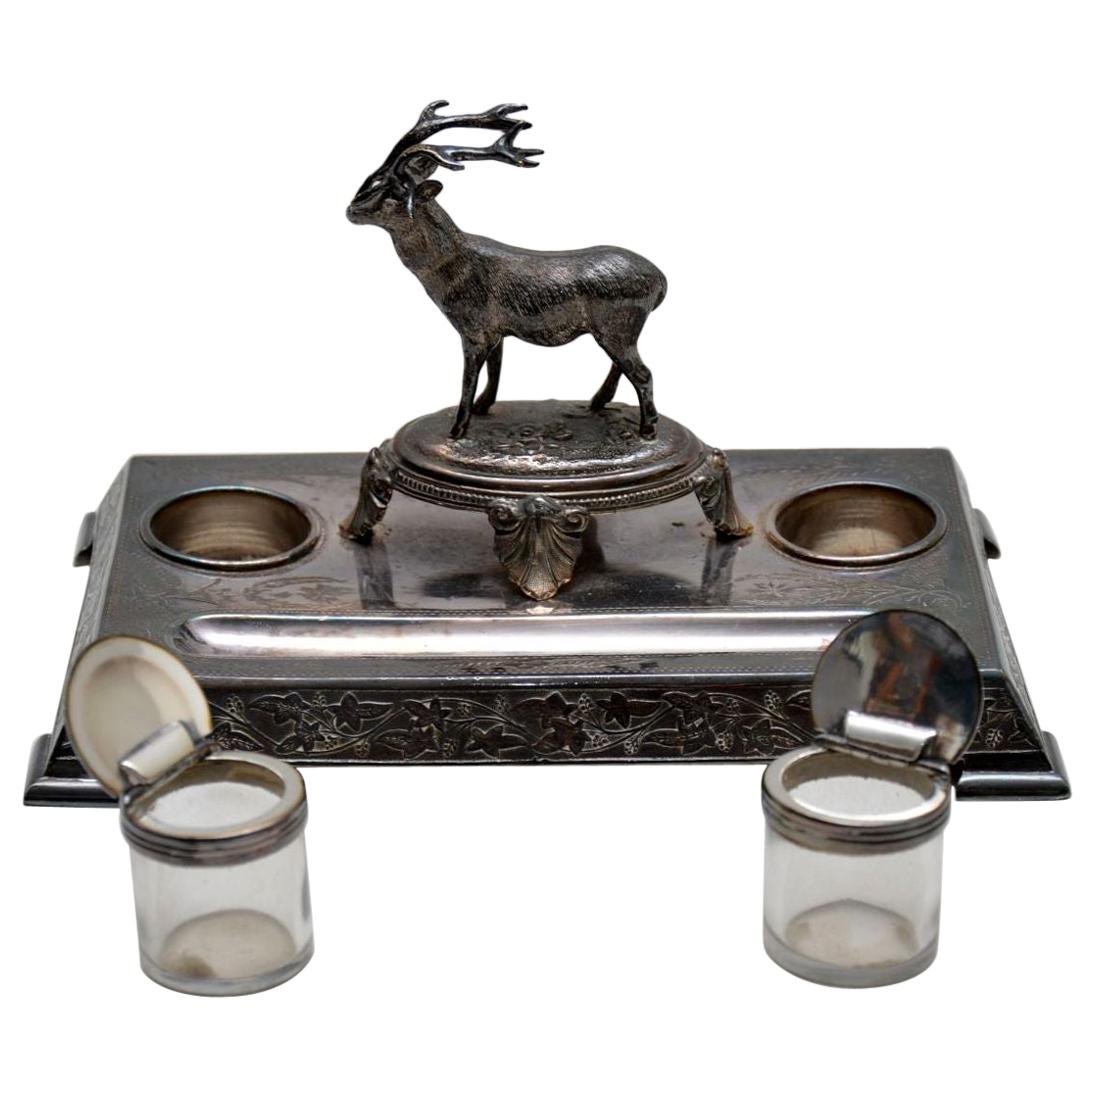 Antique Victorian silver plated inkwell stand with a well defined stag in the centre.

It was made by James Deakin & his name is impressed on the underside.

The silver plate is very tarnished and needs a good silver polish. Both the glass